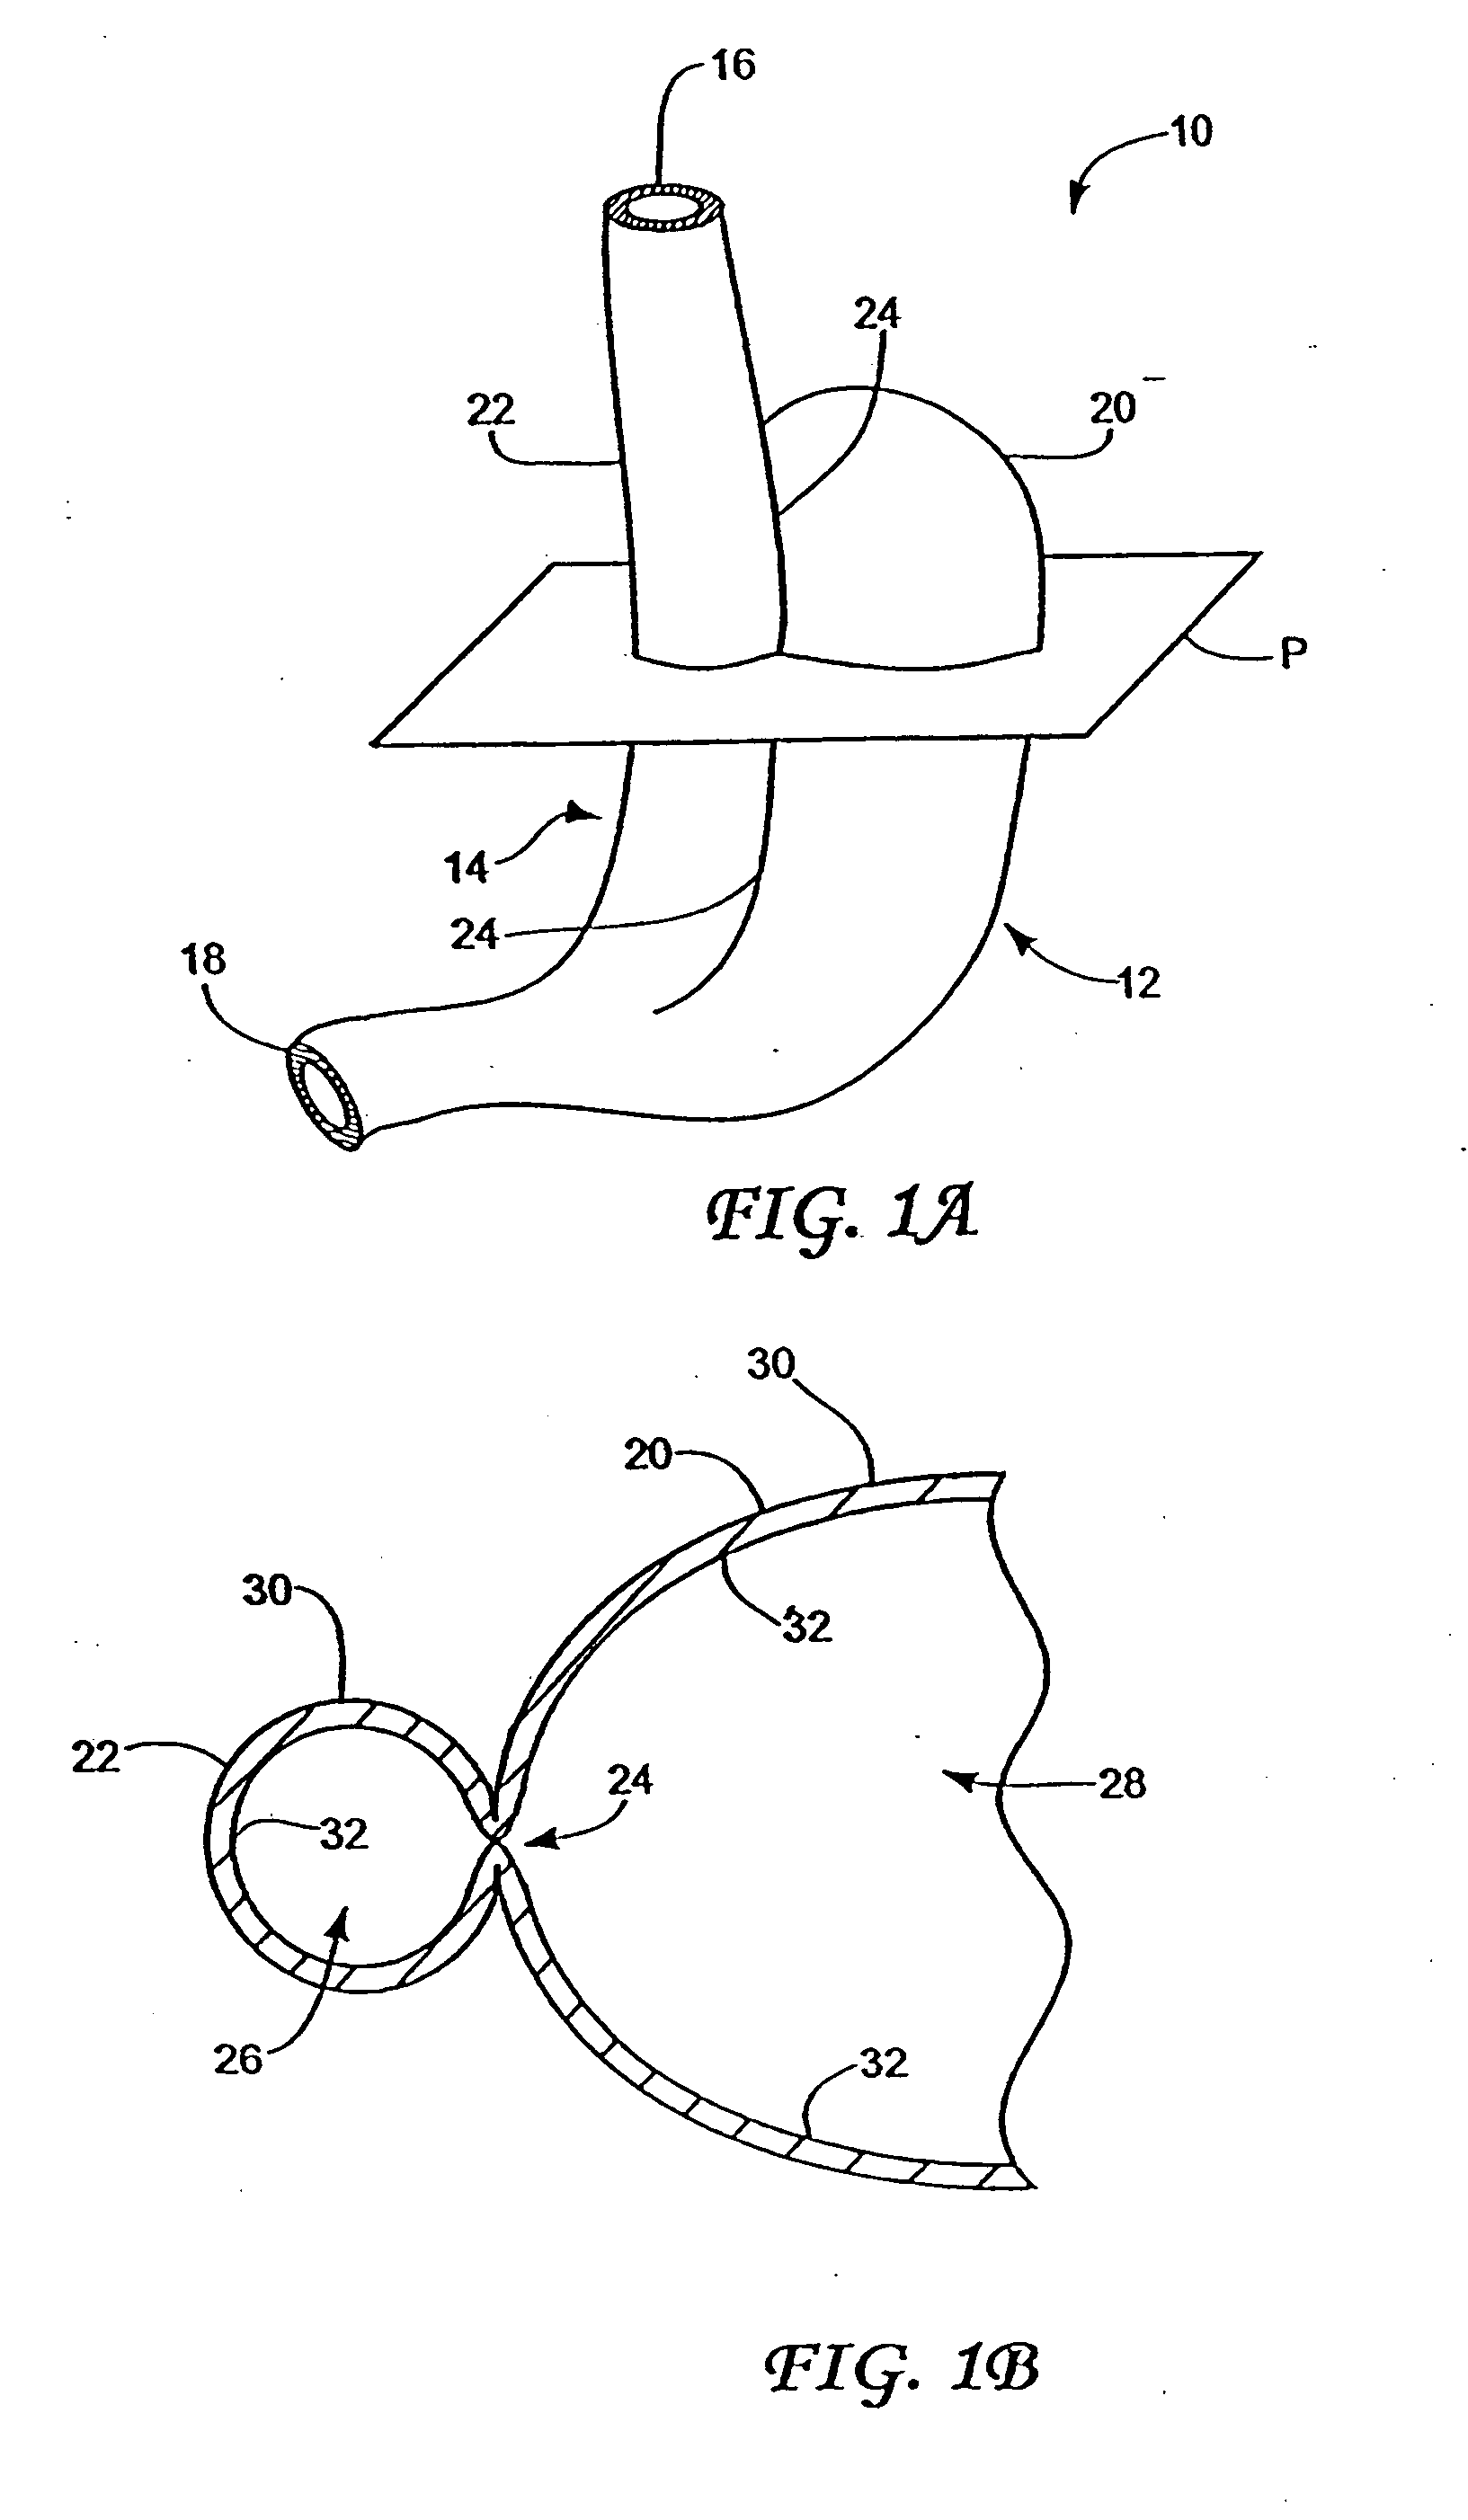 Obesity treatment tools and methods